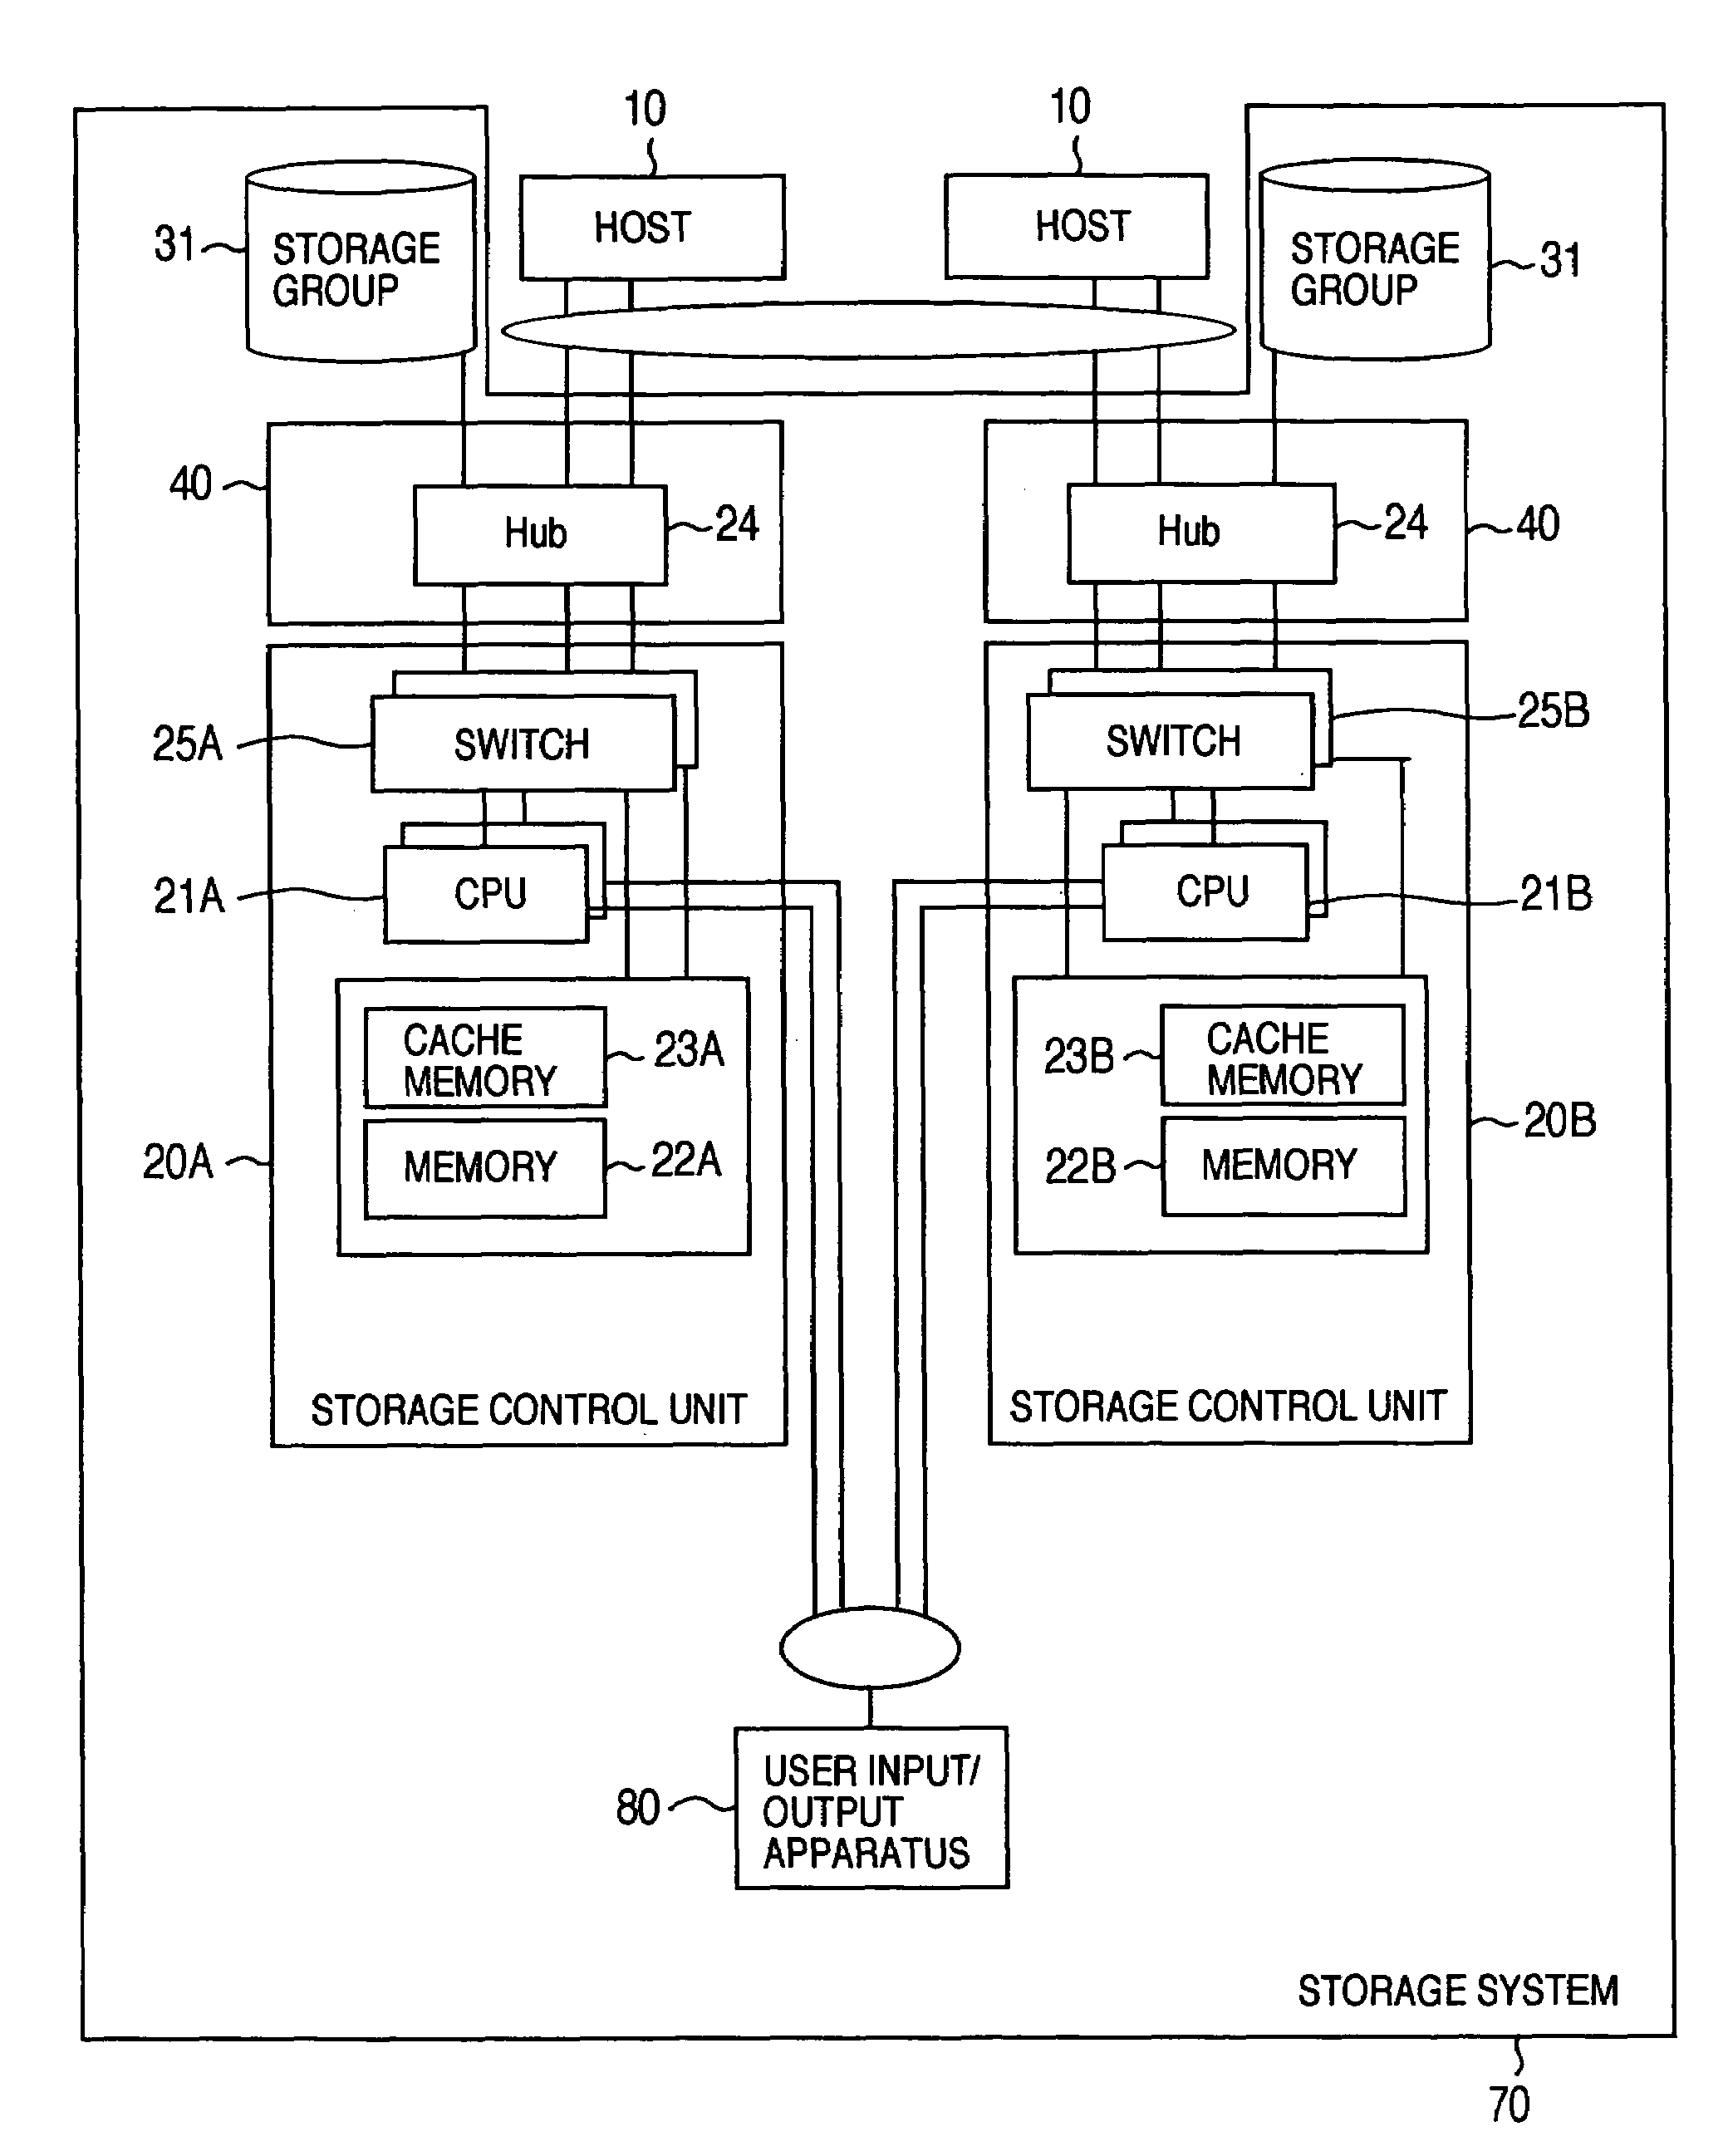 Data replication in a storage system